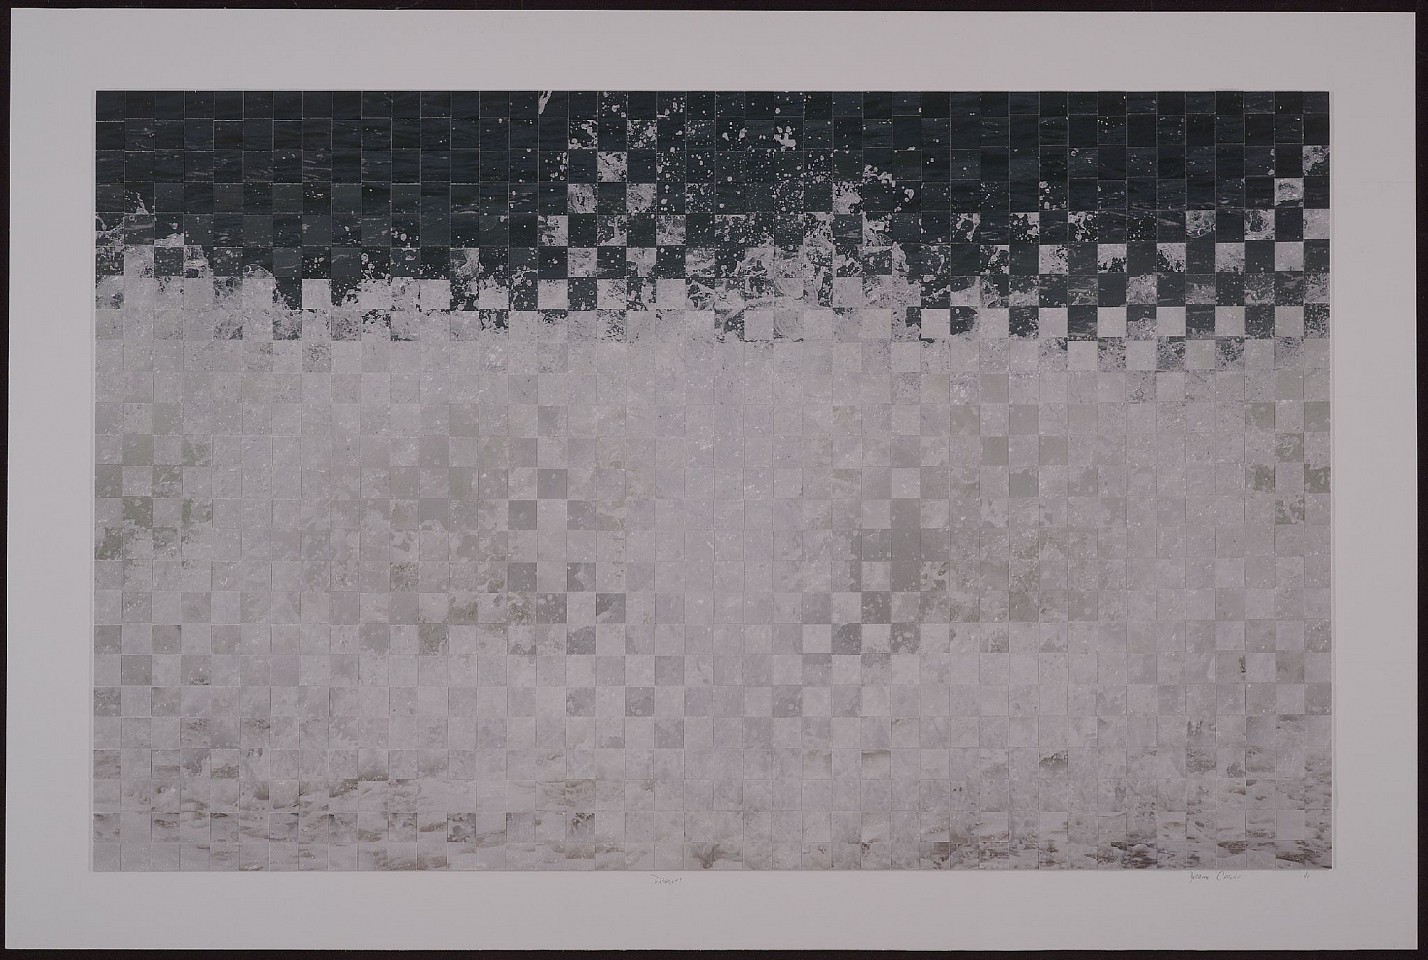 Debranne Cingari, Droplets, 2020
Handcrafted Weaved Canson Archival Photograph, 26 1/2 x 42 in. (67.3 x 106.7 cm)
DC200701